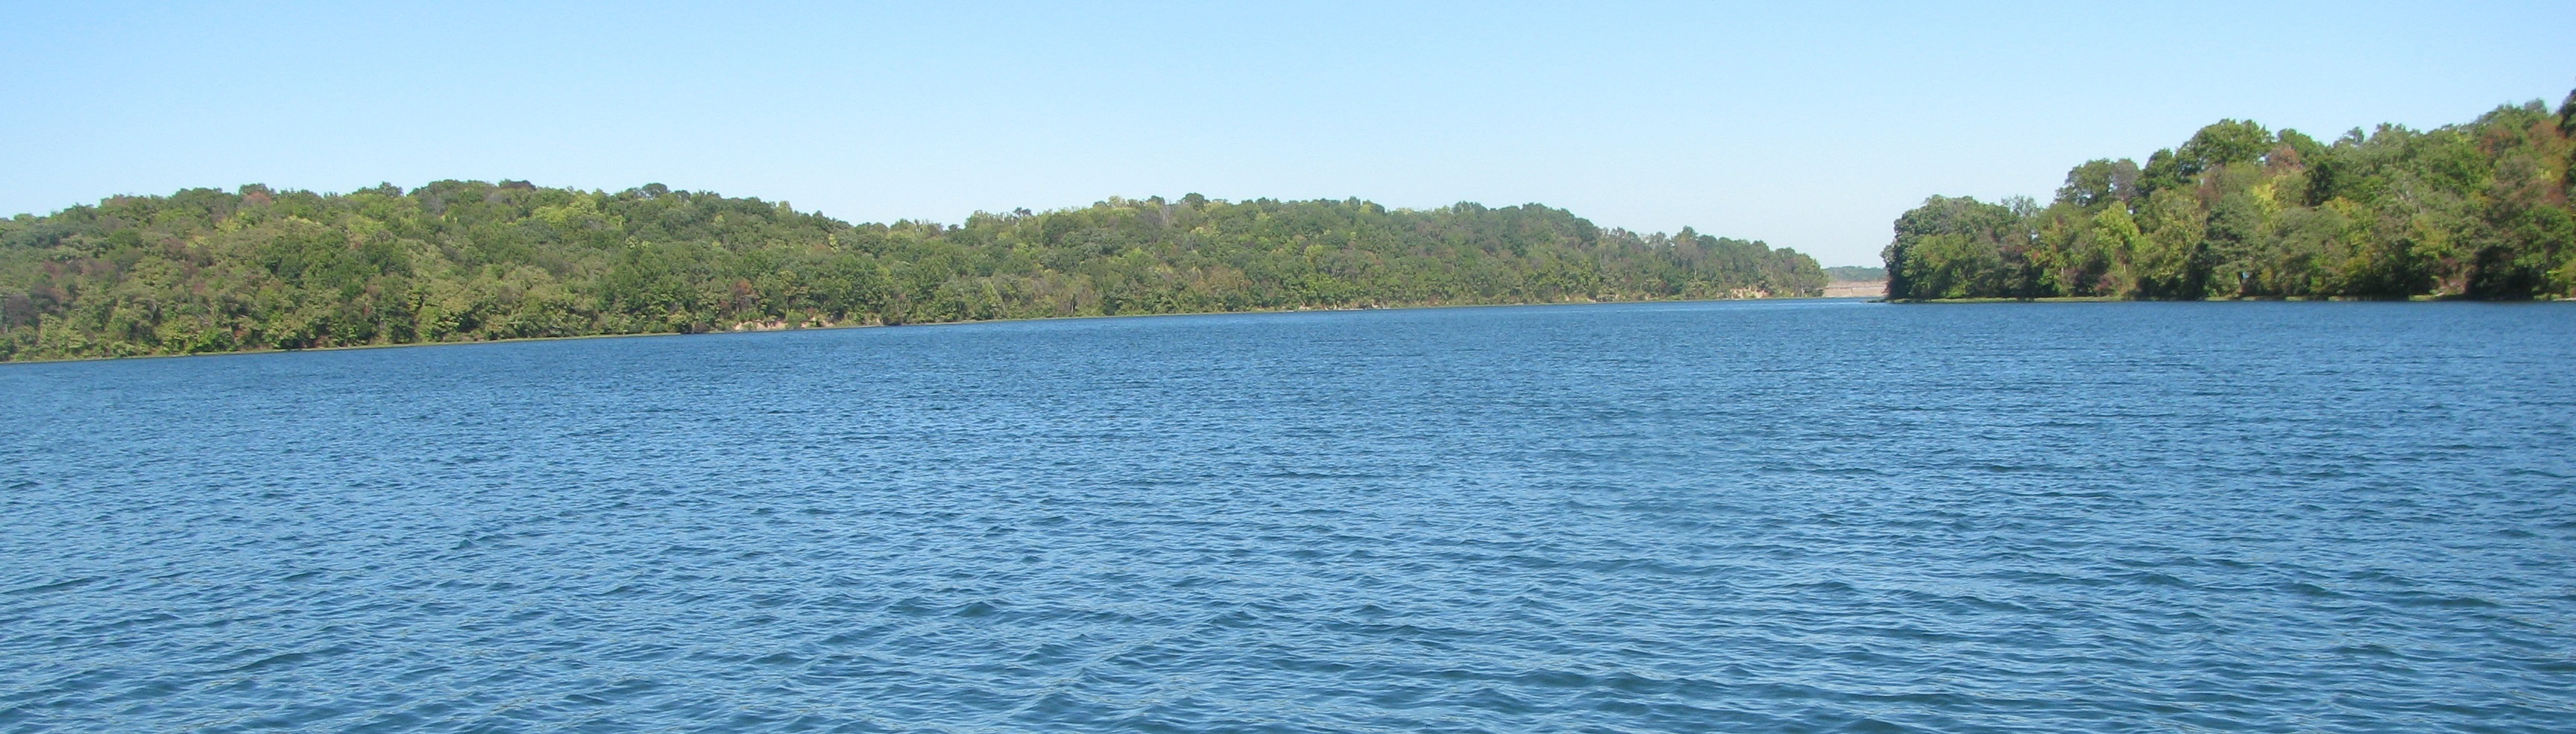 A picture of Wyandotte County Lake